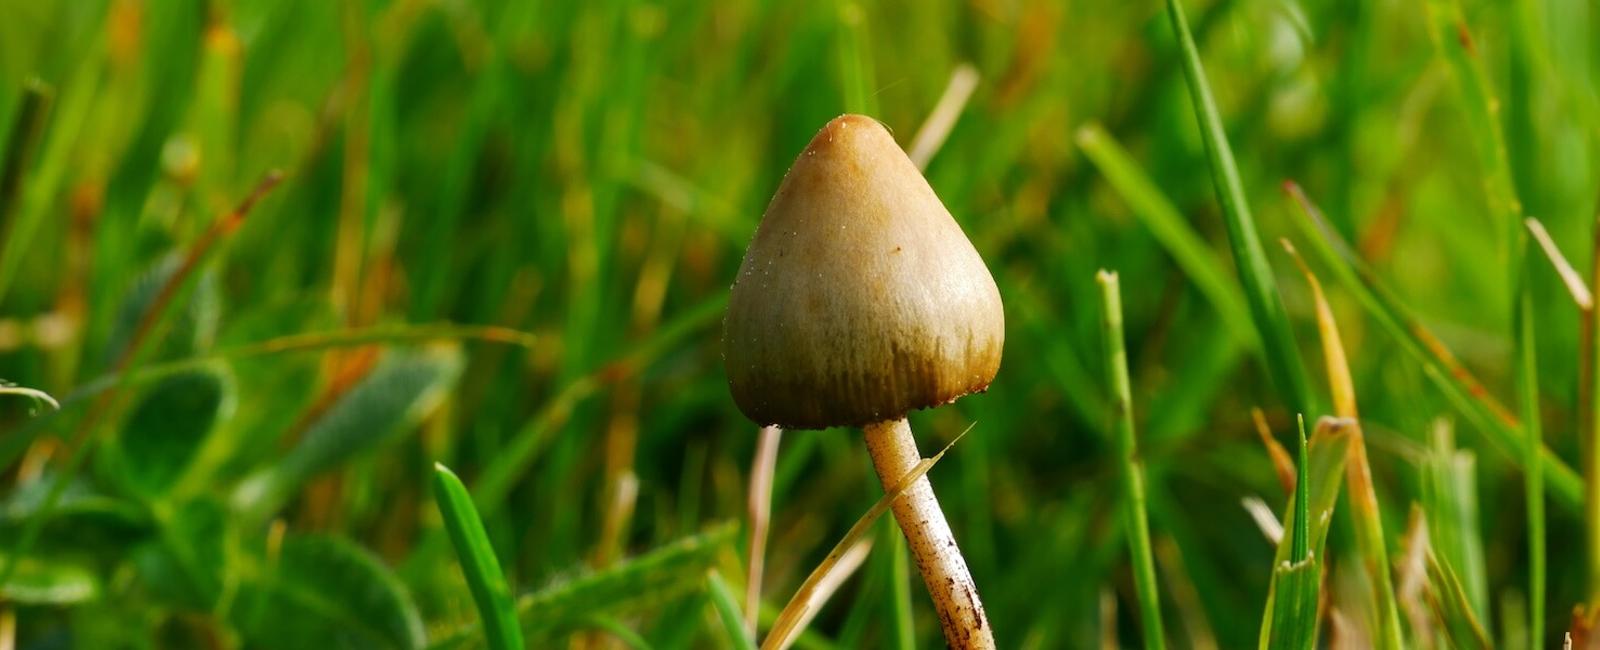 The Complete Guide to Liberty Cap Mushrooms